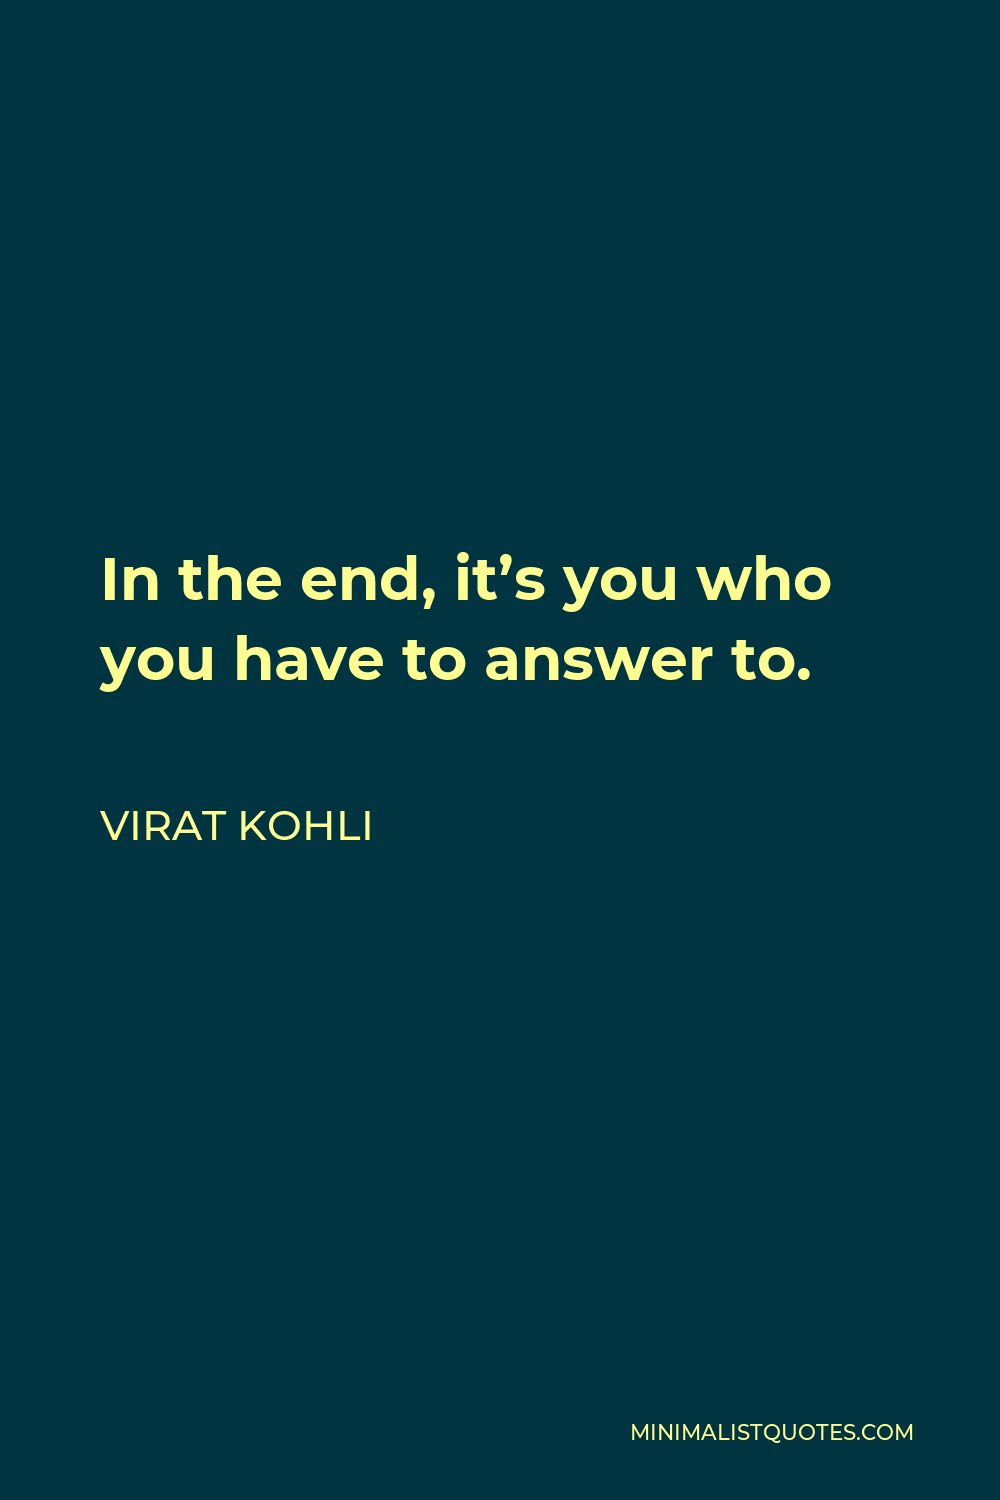 Virat Kohli Quote - In the end, it’s you who you have to answer to.